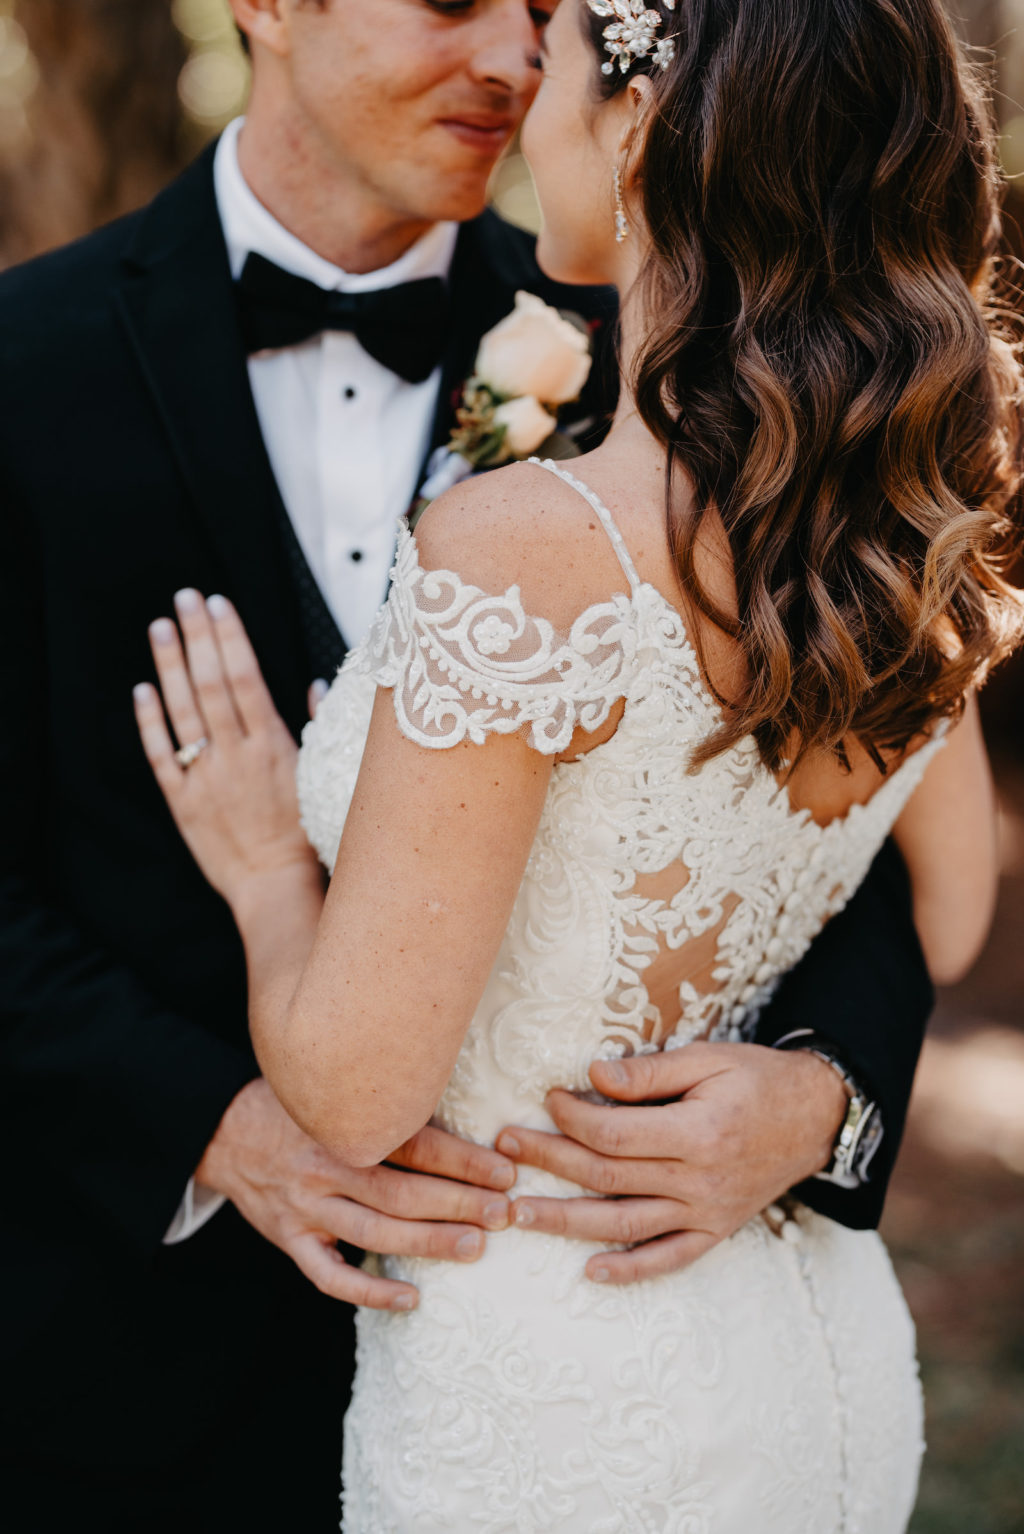 Romantic Bride and Groom Photo, Bride Wearing Lace and Illusion Cap Sleeve Maggie Sottero Wedding Dress, Groom in Classic Black Tuxedo | Tampa Bay Wedding Hair and Makeup Michele Renee the Studio